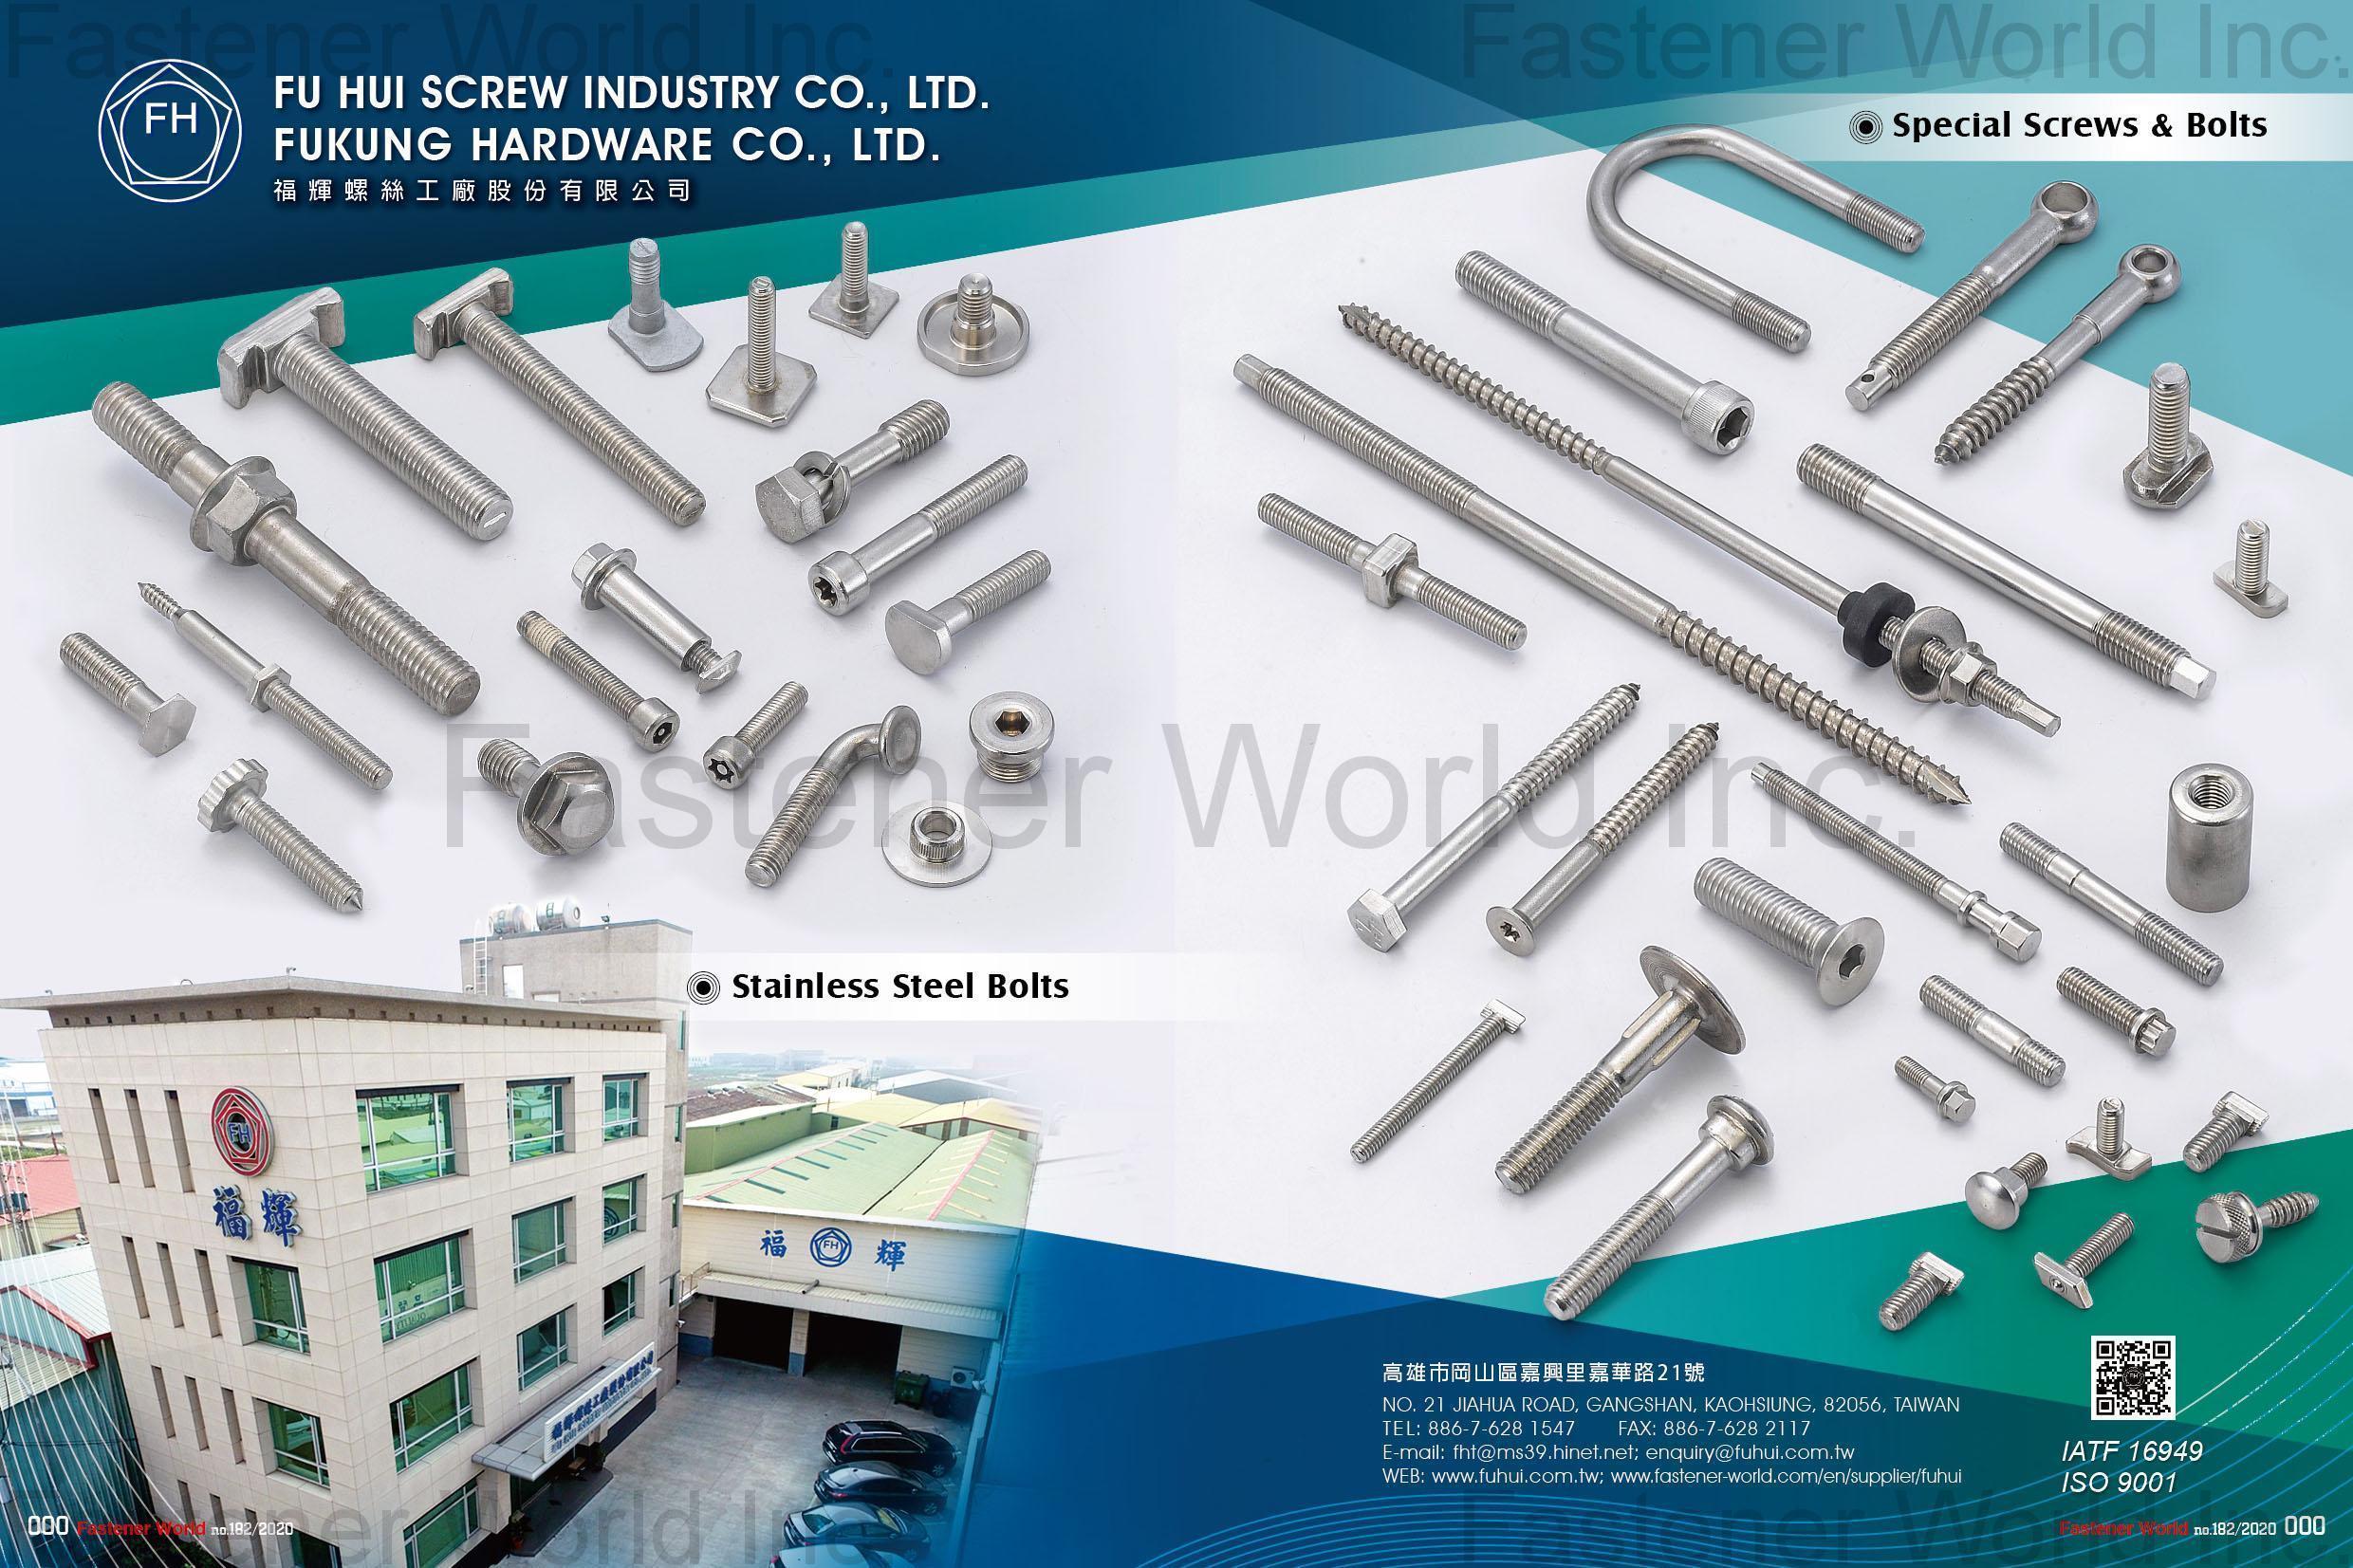 FU HUI SCREW INDUSTRY CO., LTD. (FUKUNG  HARDWARE  CO.  LTD.) , Stainless Steel Bolts, Special Screws & Bolts , Stainless Steel Bolts